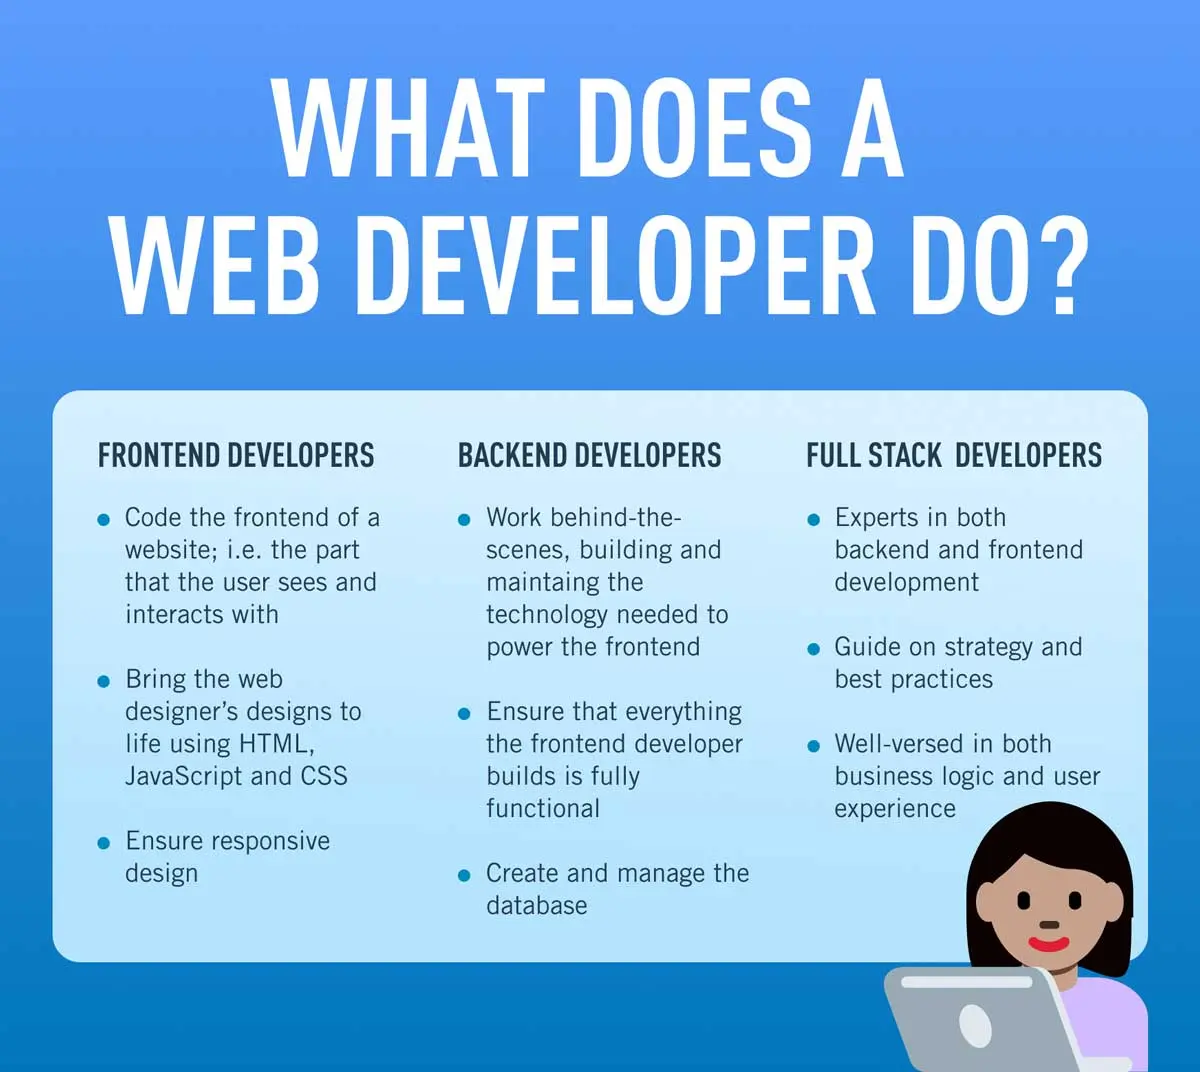 A summary of what a web developer does